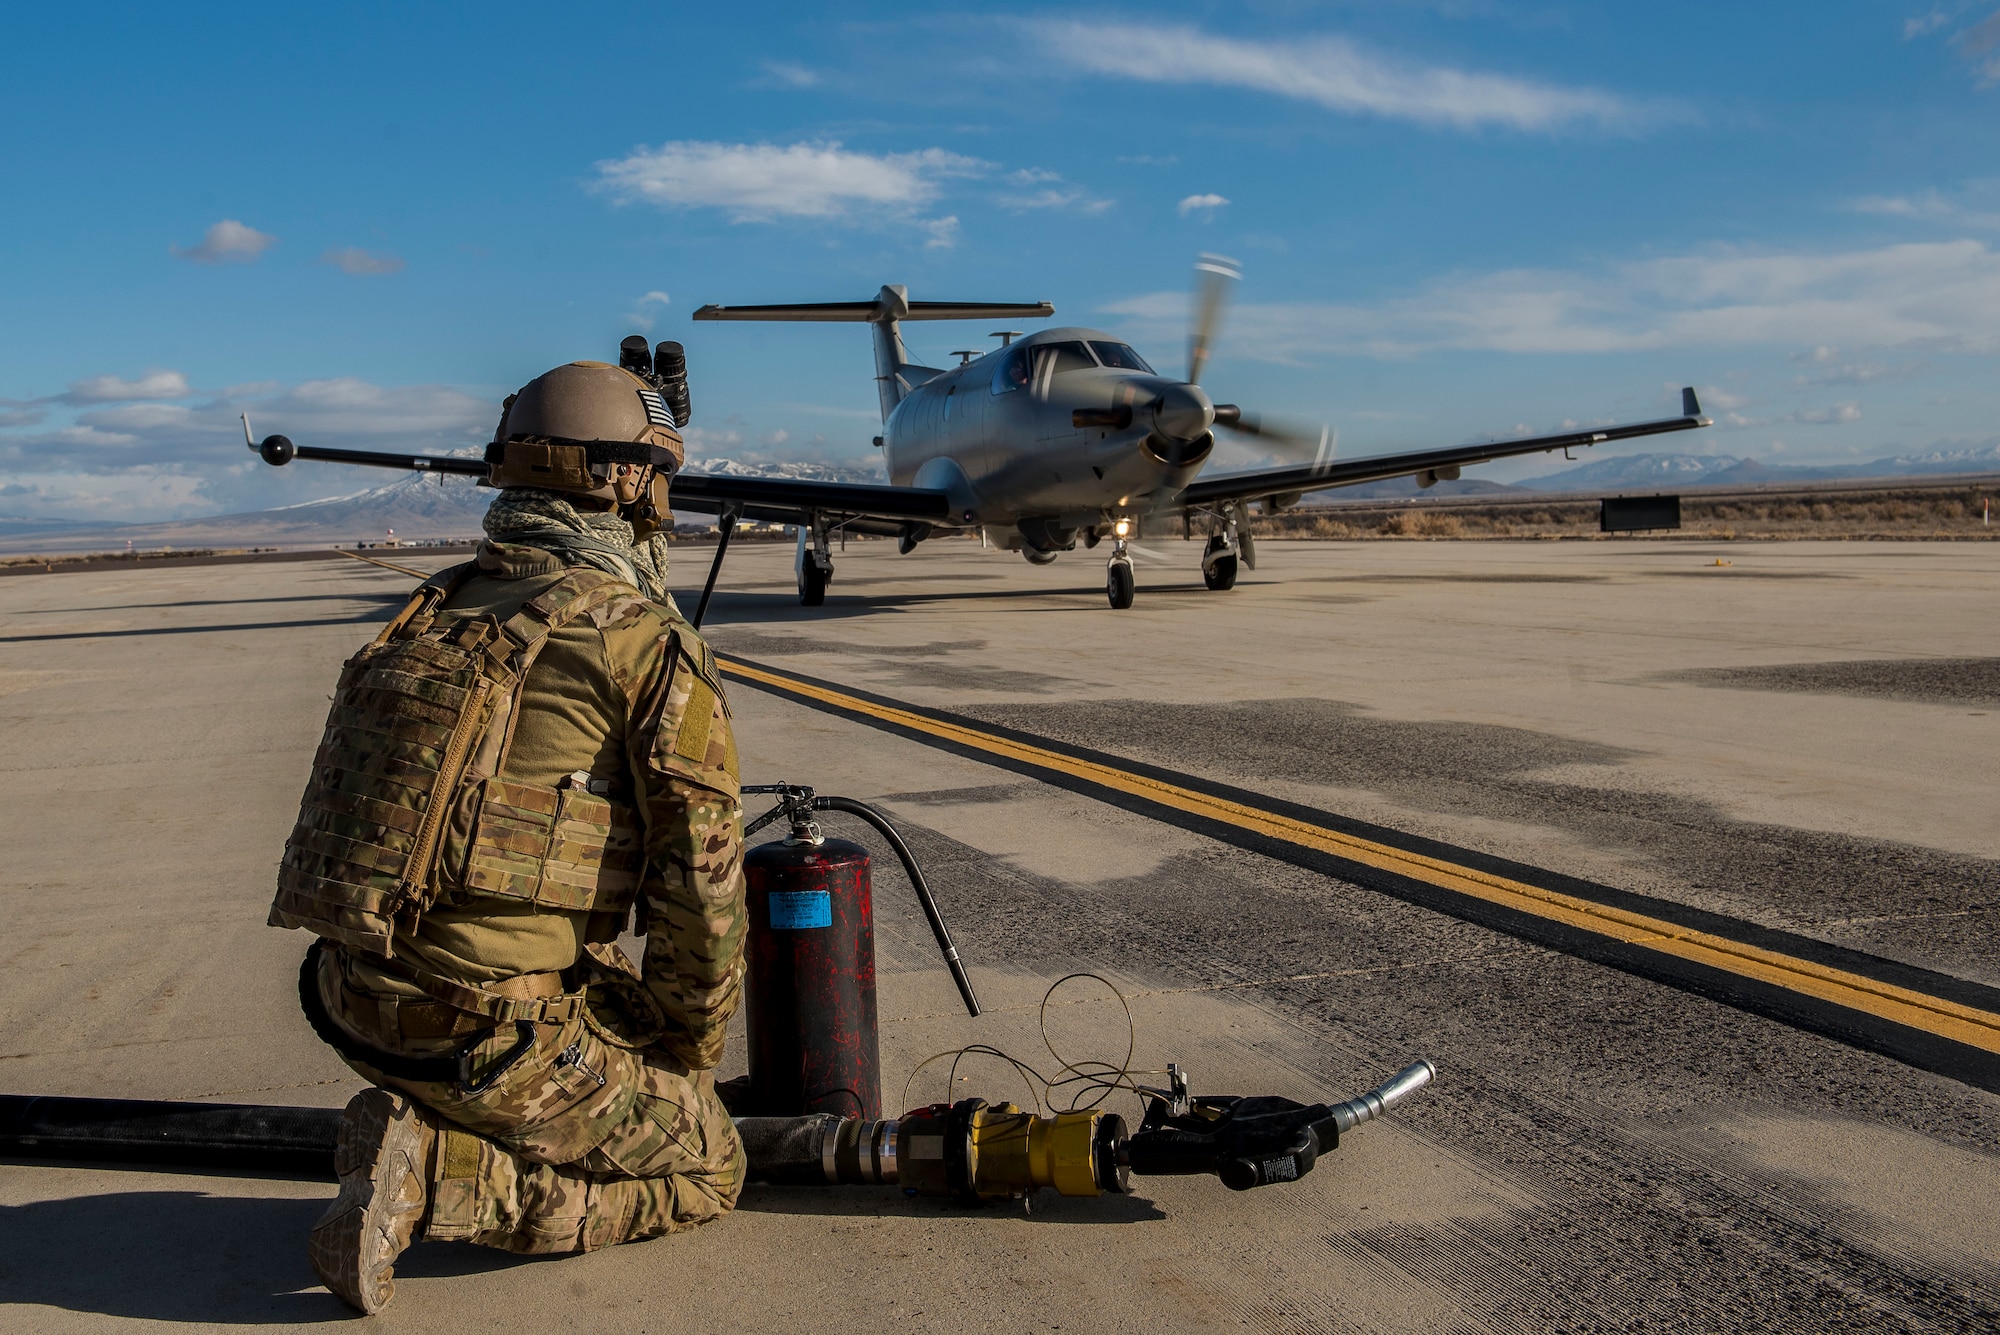 A Forward Area Refueling Point Airman assigned to the 27th Special Operations Mission Sustainment Team 1 provides perimeter security during the 27th Special Operations Wing operational readiness exercise at Dugway Proving Grounds, Utah, March 22, 2021. The Mission Sustainment Team concept provides a way forward in building small, scattered teams capable of operating independent of main operating bases. (U.S. Air Force photo by Senior Airman Vernon R. Walter III)